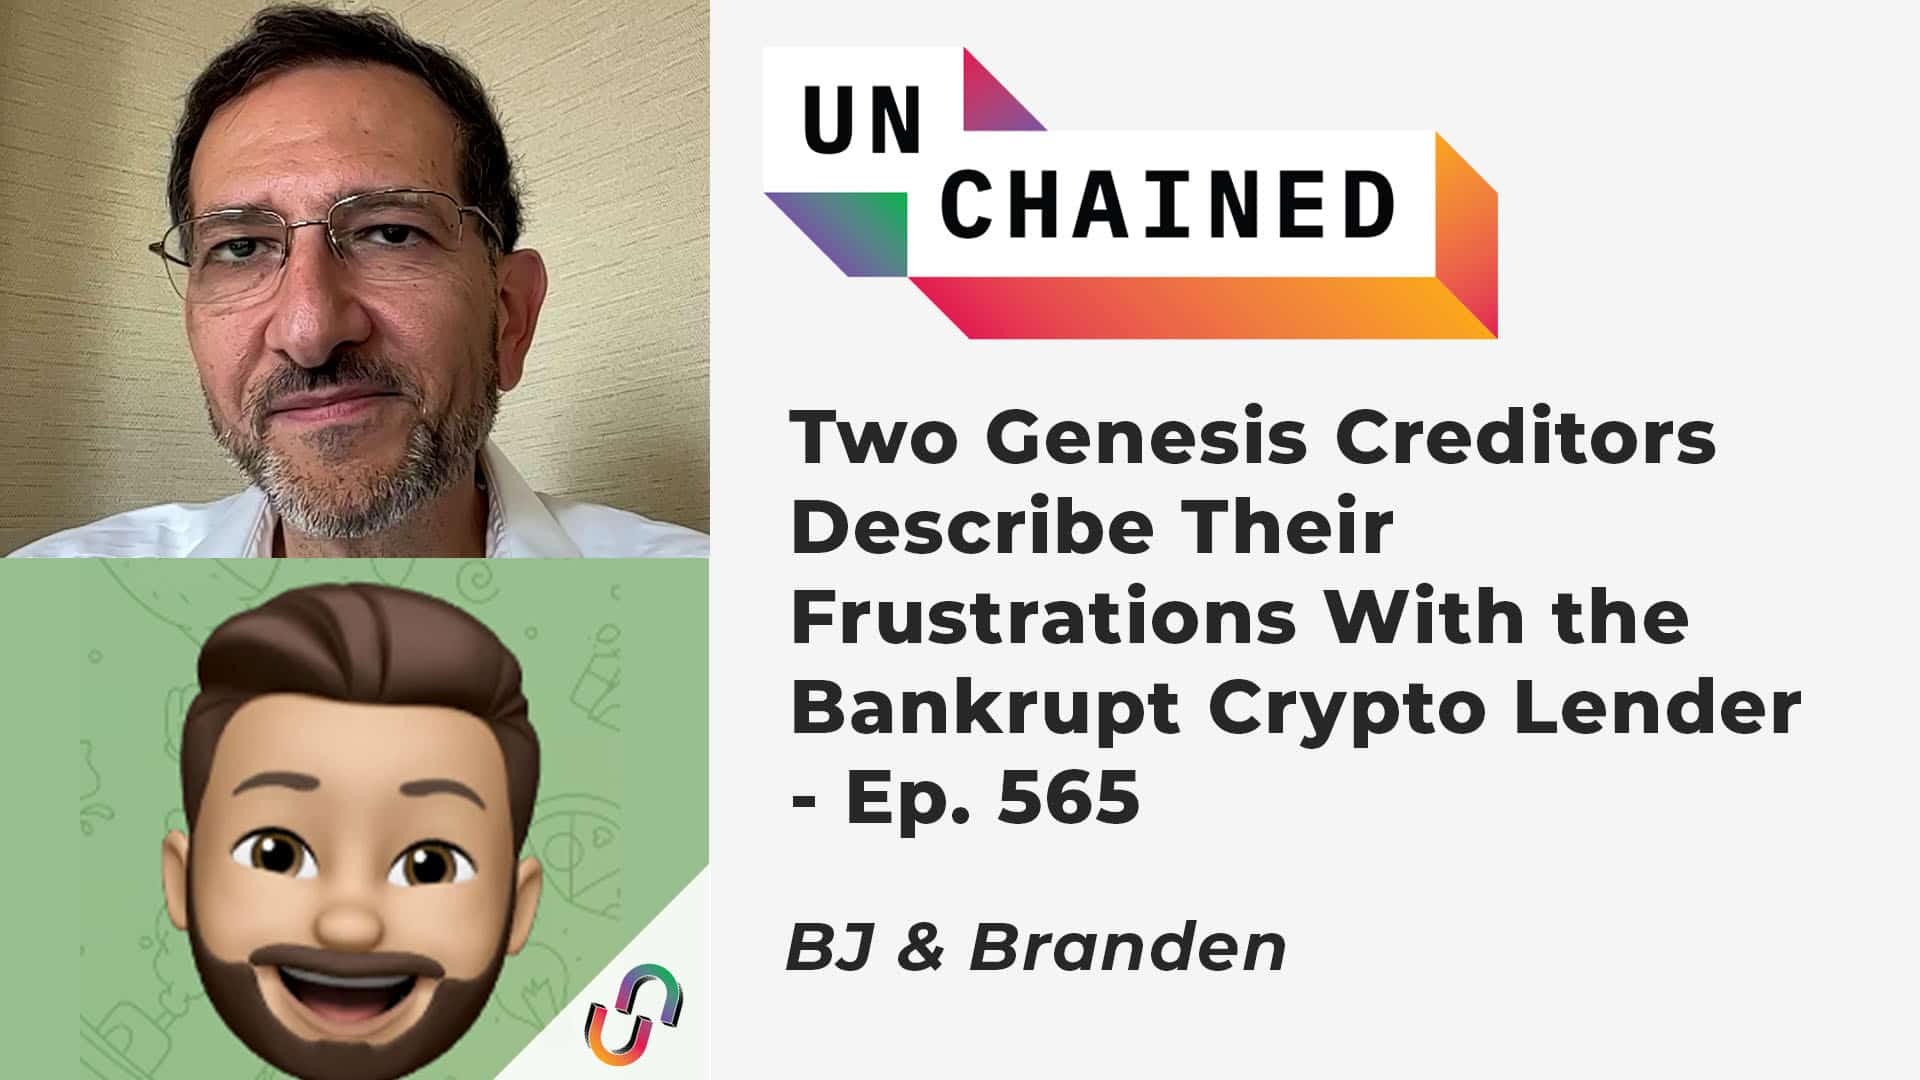 Two Genesis Creditors Describe Their Frustrations With the Bankrupt Crypto Lender - Ep. 565